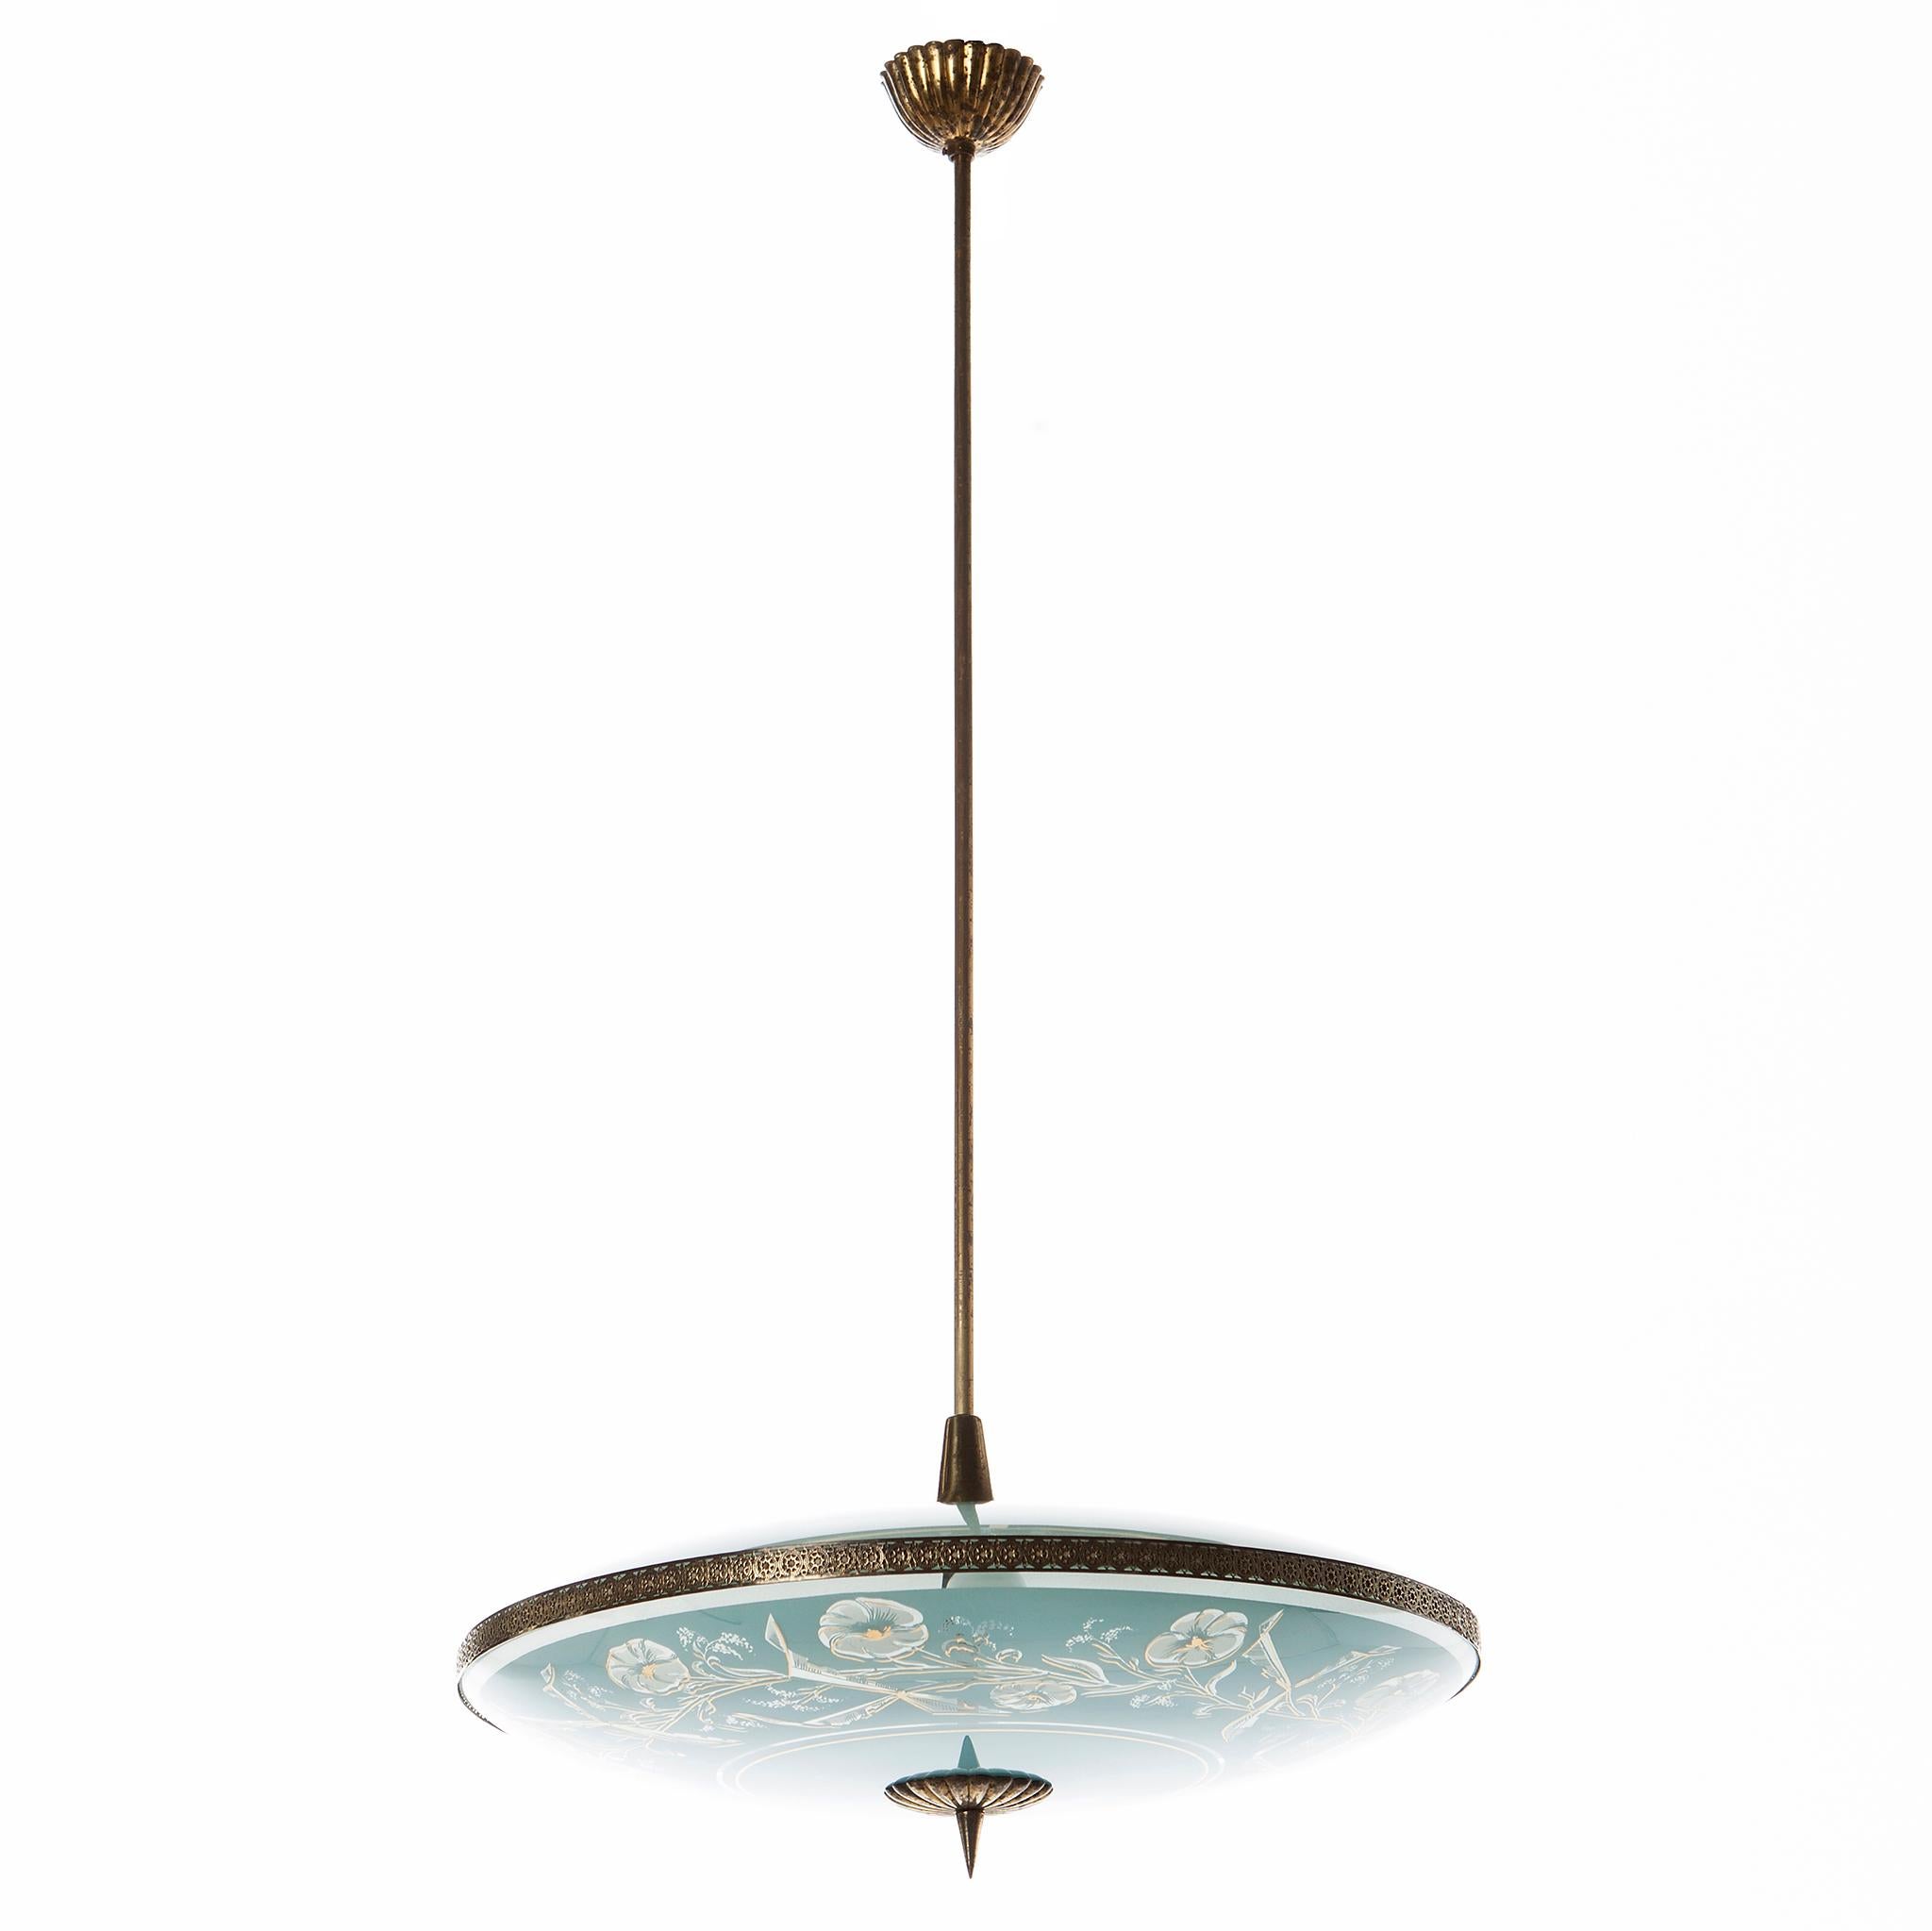 This elegant piece consisting of a brass frame and 2 unique frosted and satin glass reflector/dishes 
The lower round curved glass reflector with floral motifs and a gold-colored rim mounts below a round satin blue glass reflector. Finished off